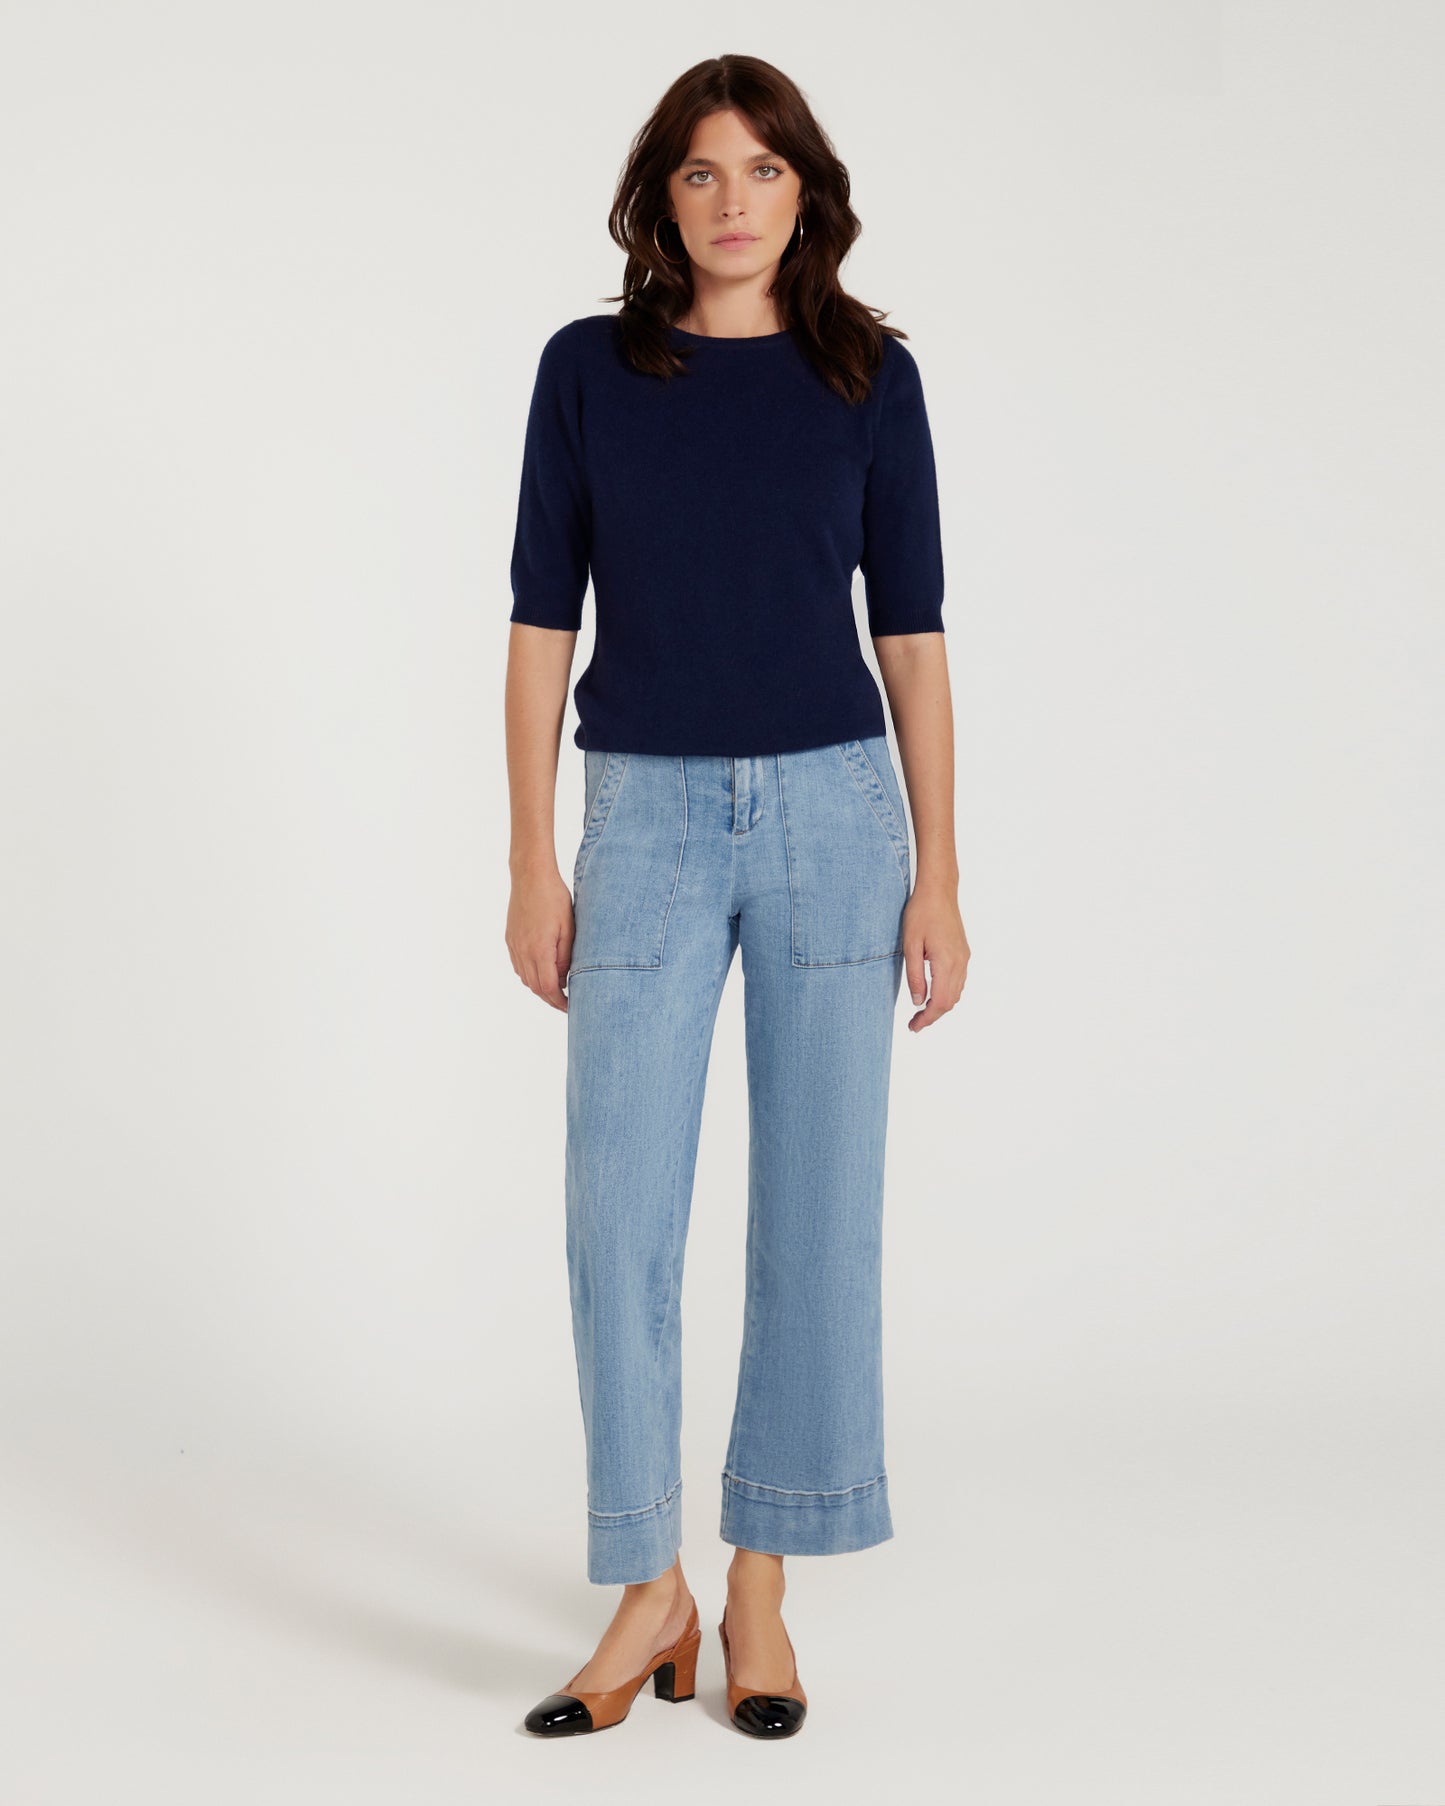 Margaux Knit Top In Cashmere & Wool - NAVY BLUE